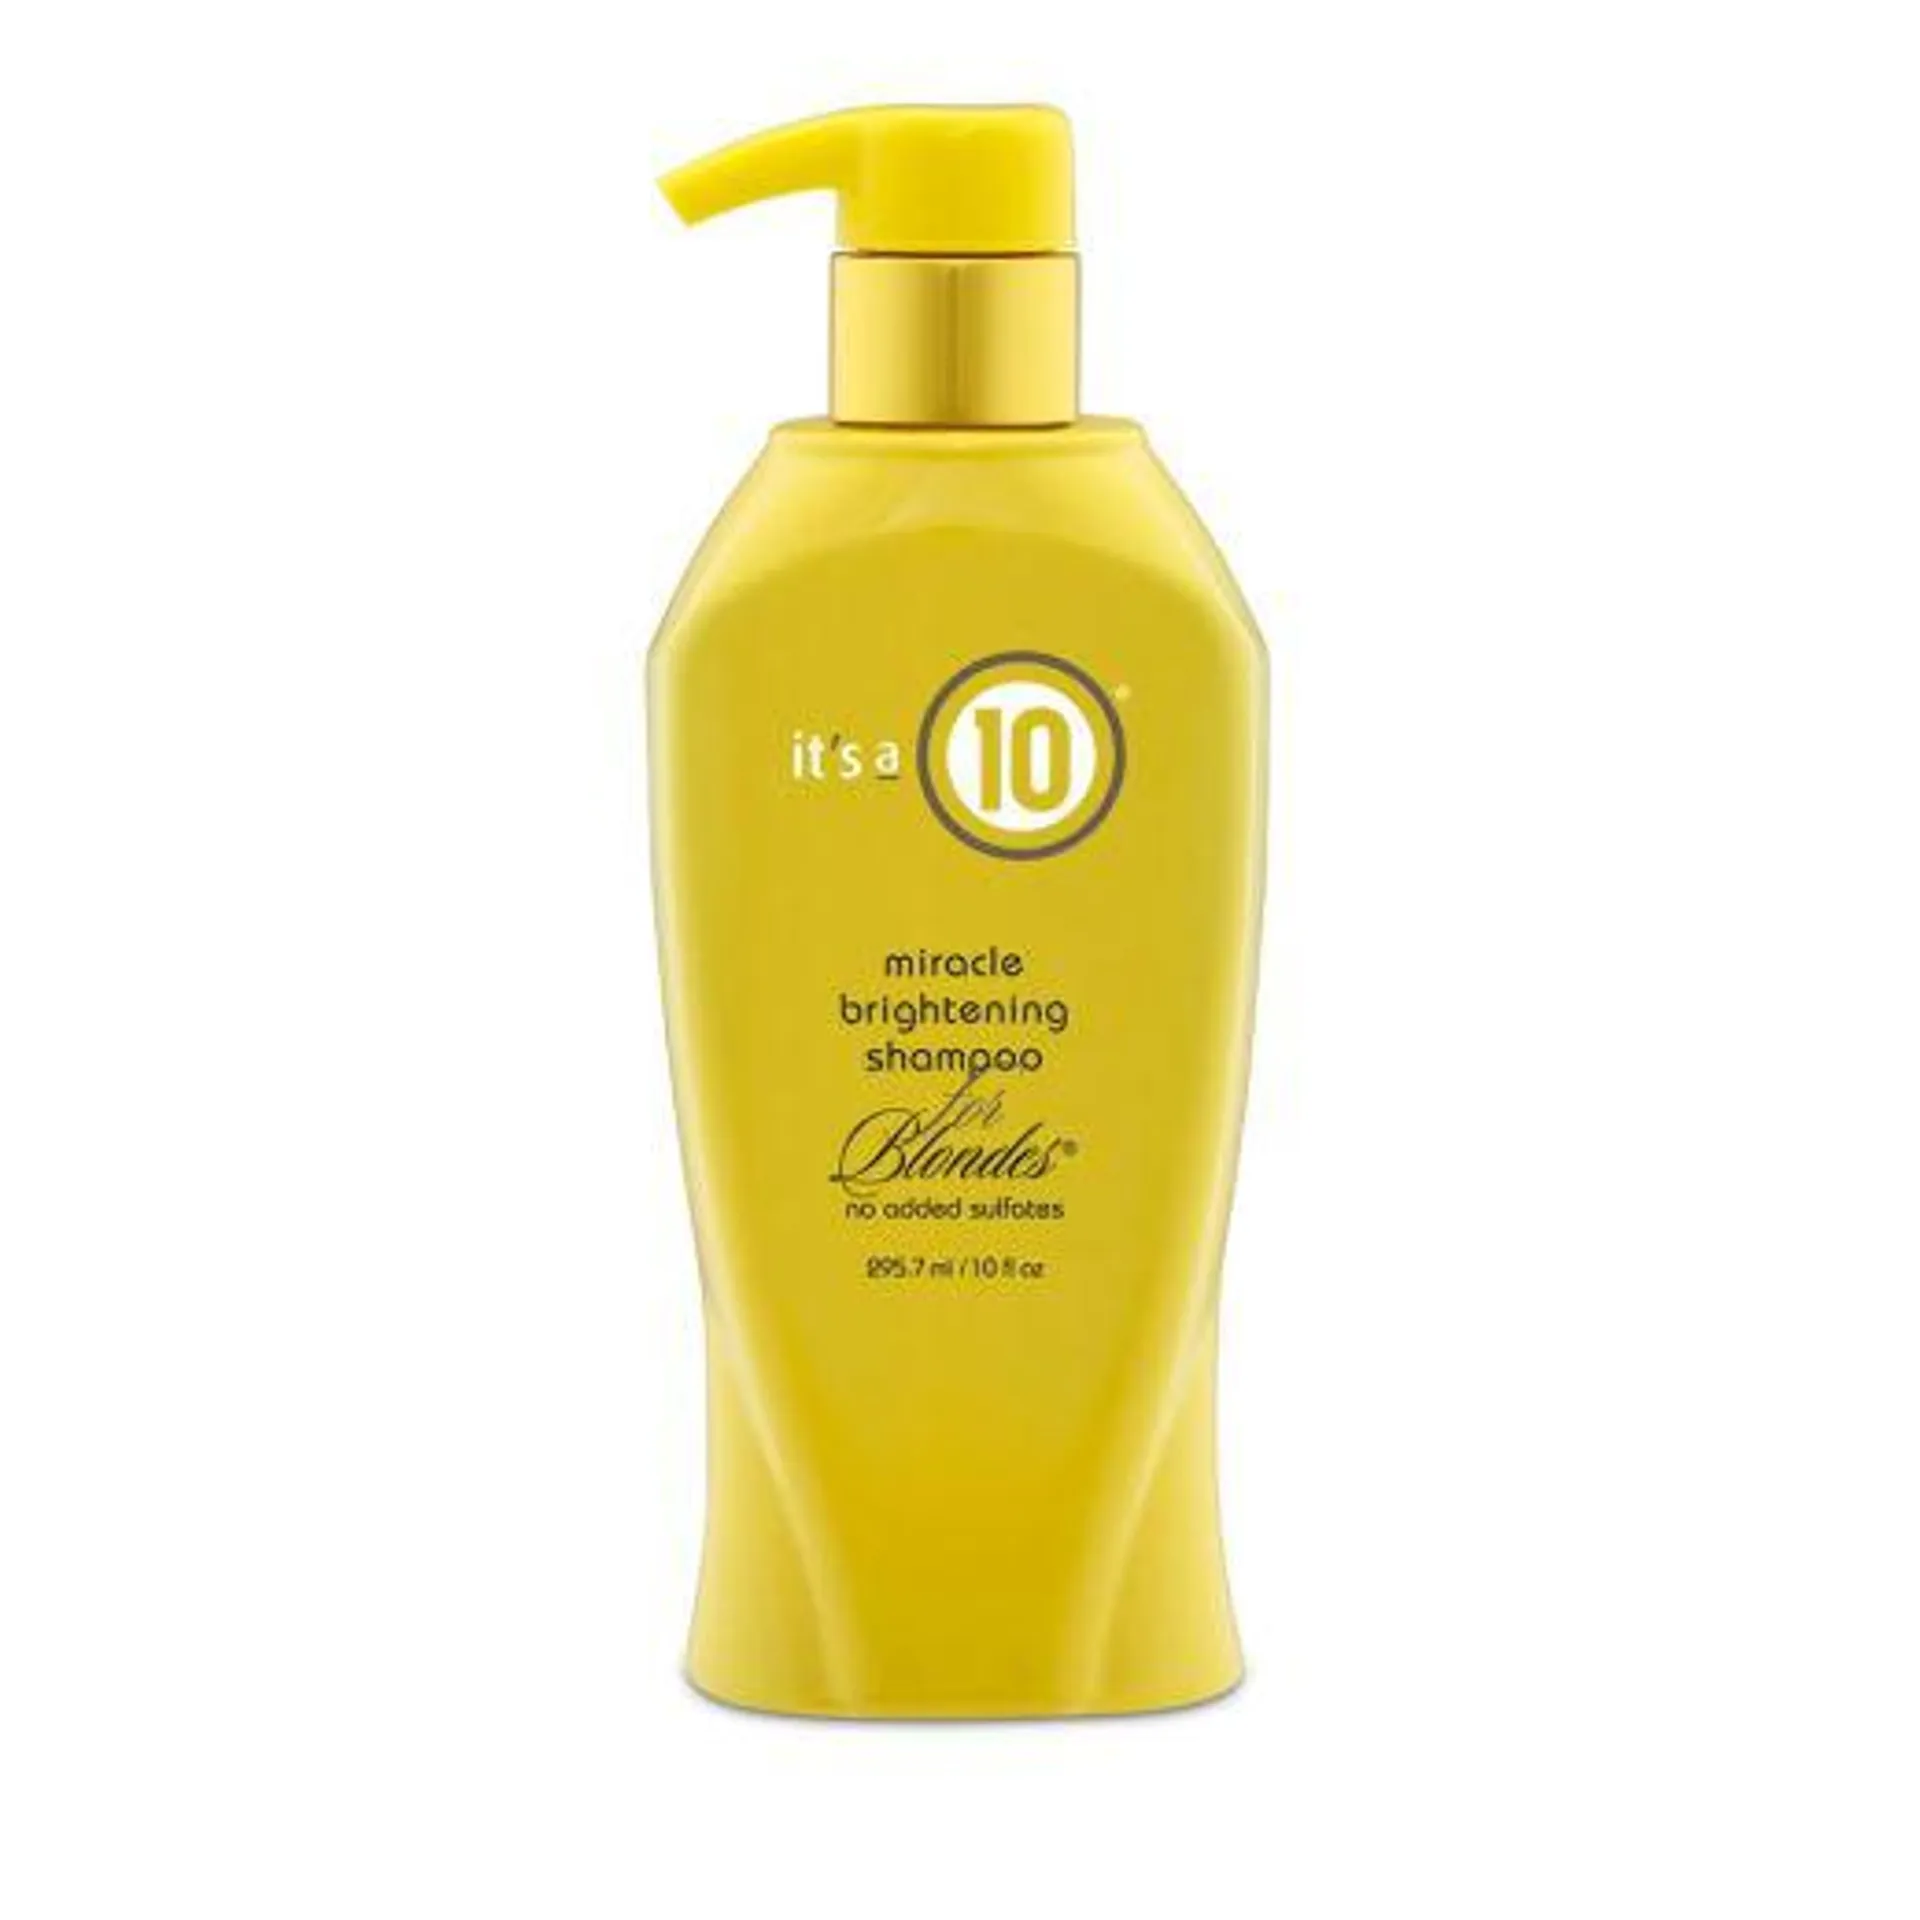 It’s a 10 Miracle Brightening Shampoo for Blondes 295ml